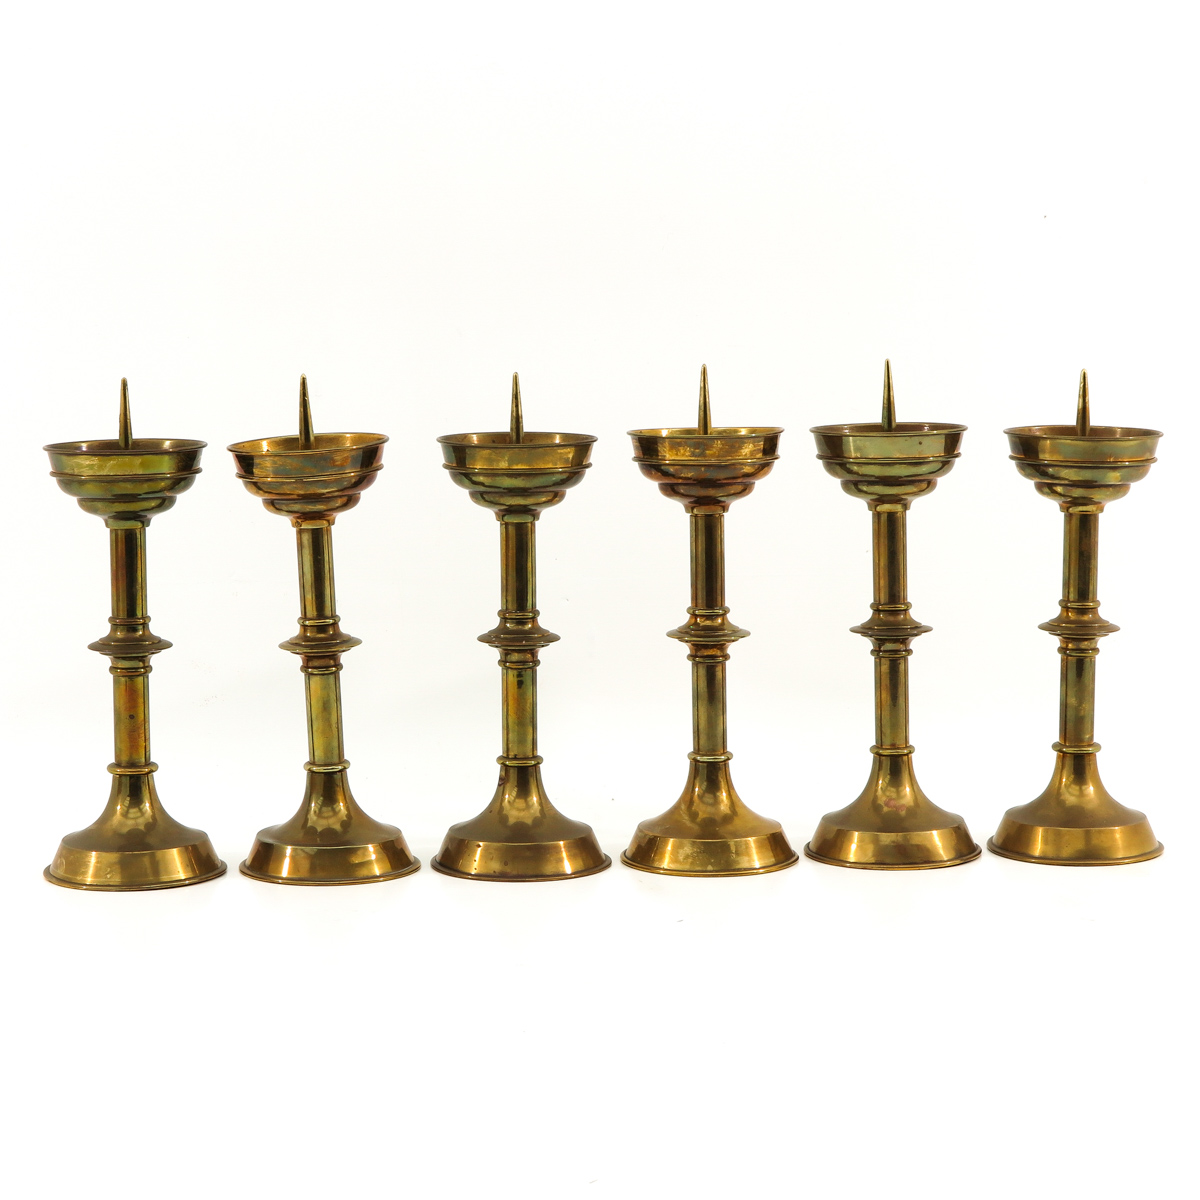 A Set of 6 Yellow Copper Altar Candlesticks - Image 3 of 8